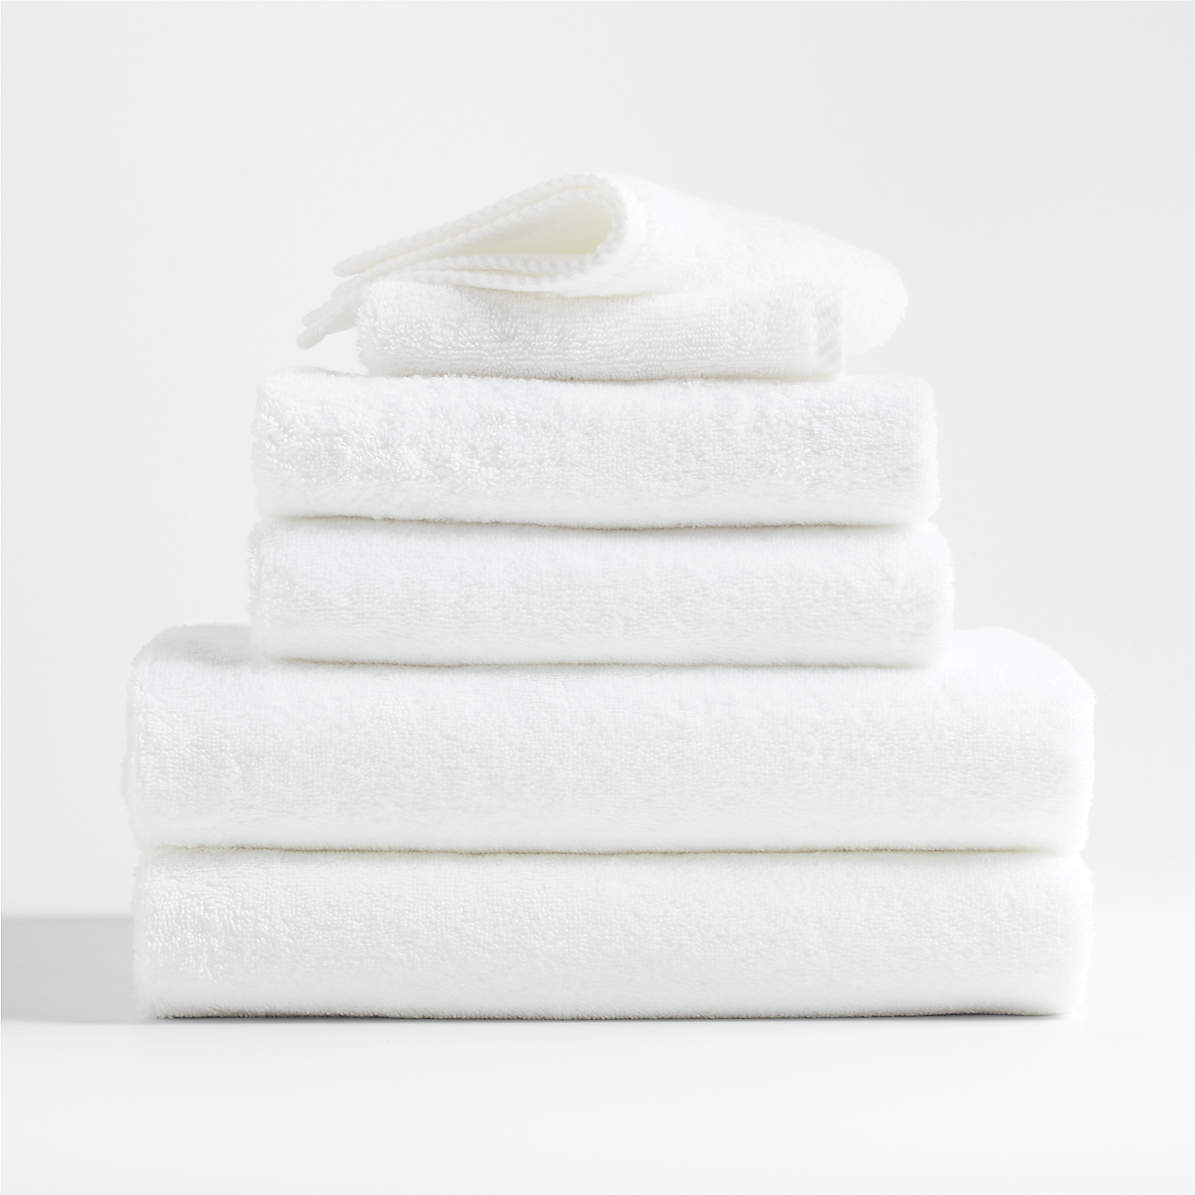 Premium Photo  Towels clean fresh fluffy towels and bath accessories on  table in bathroom